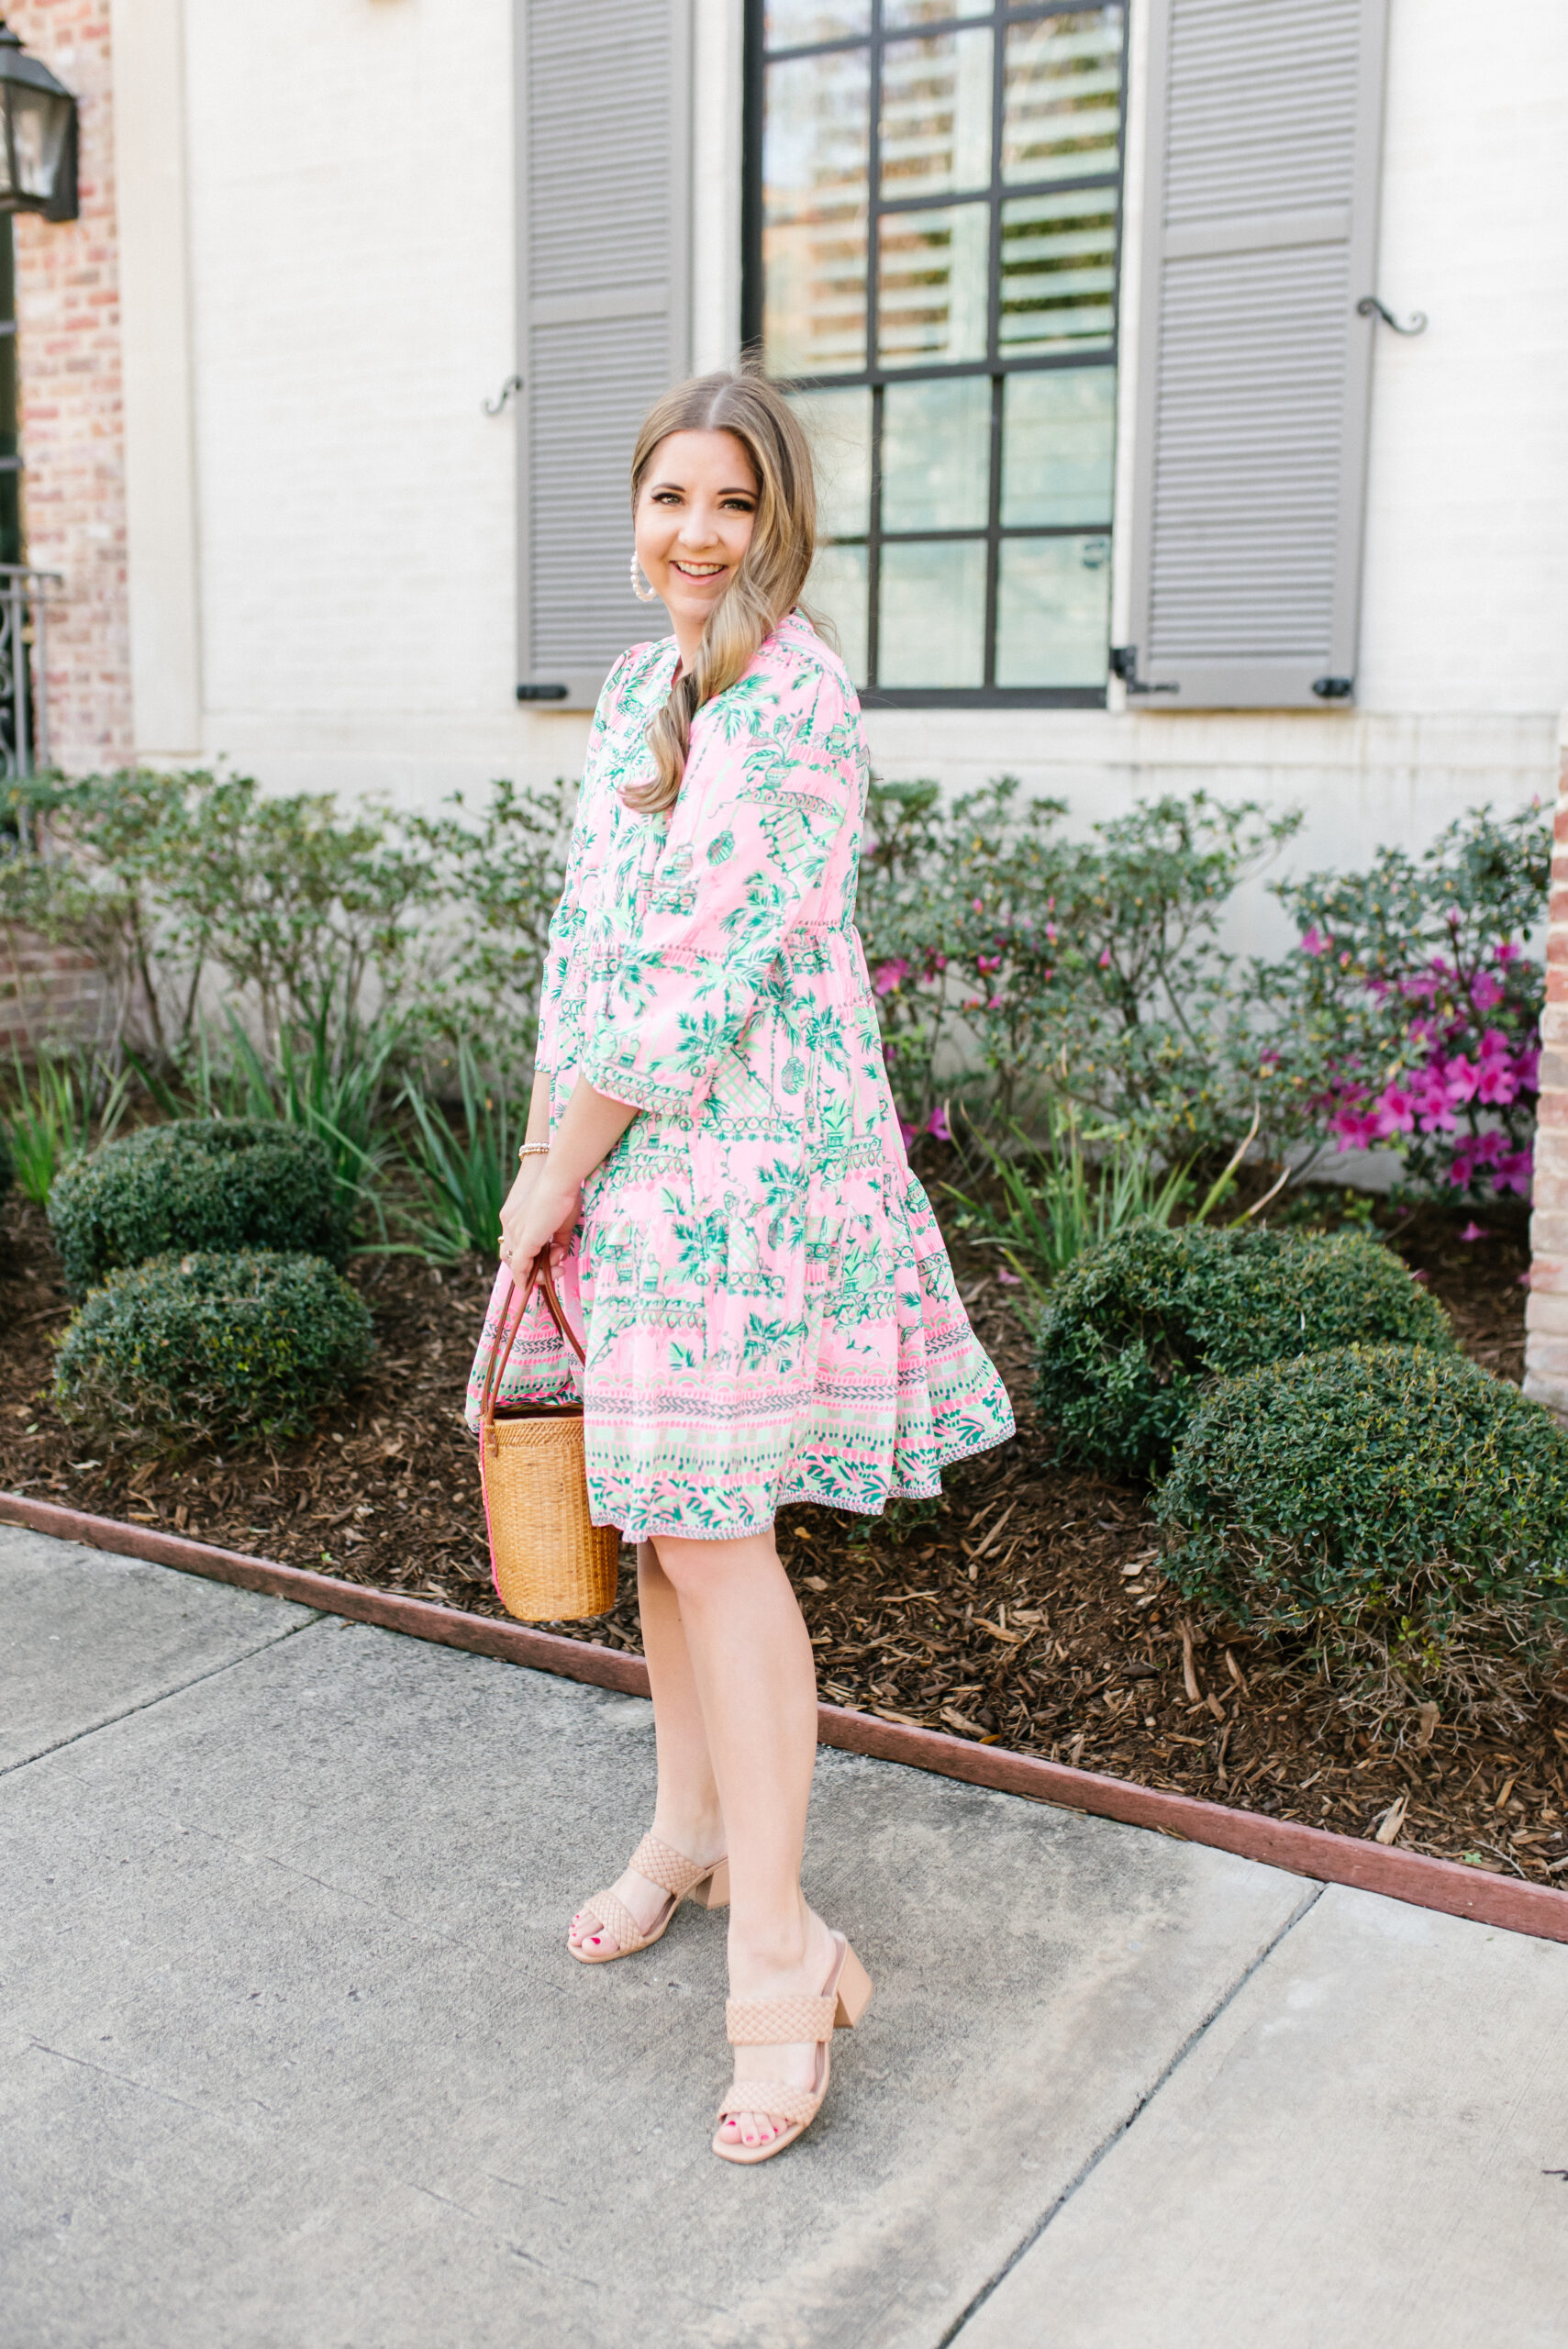 Lilly Pulitzer's Splash Sale Is Here With Discounts Up To 50% Off